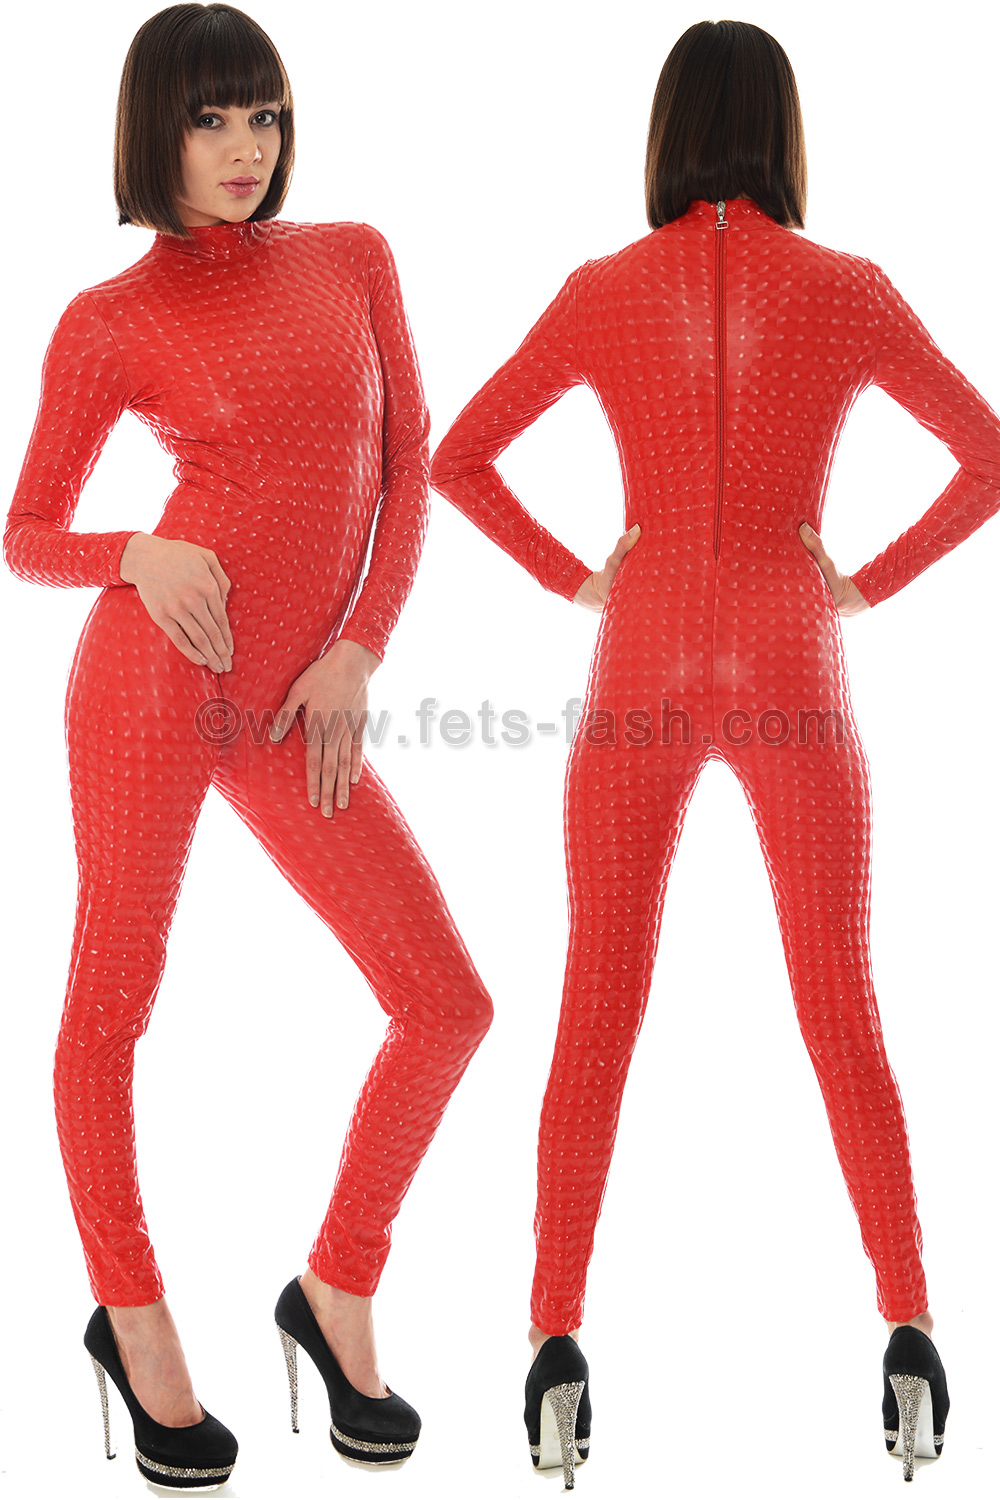 Catsuit Stretchlack Red Cube